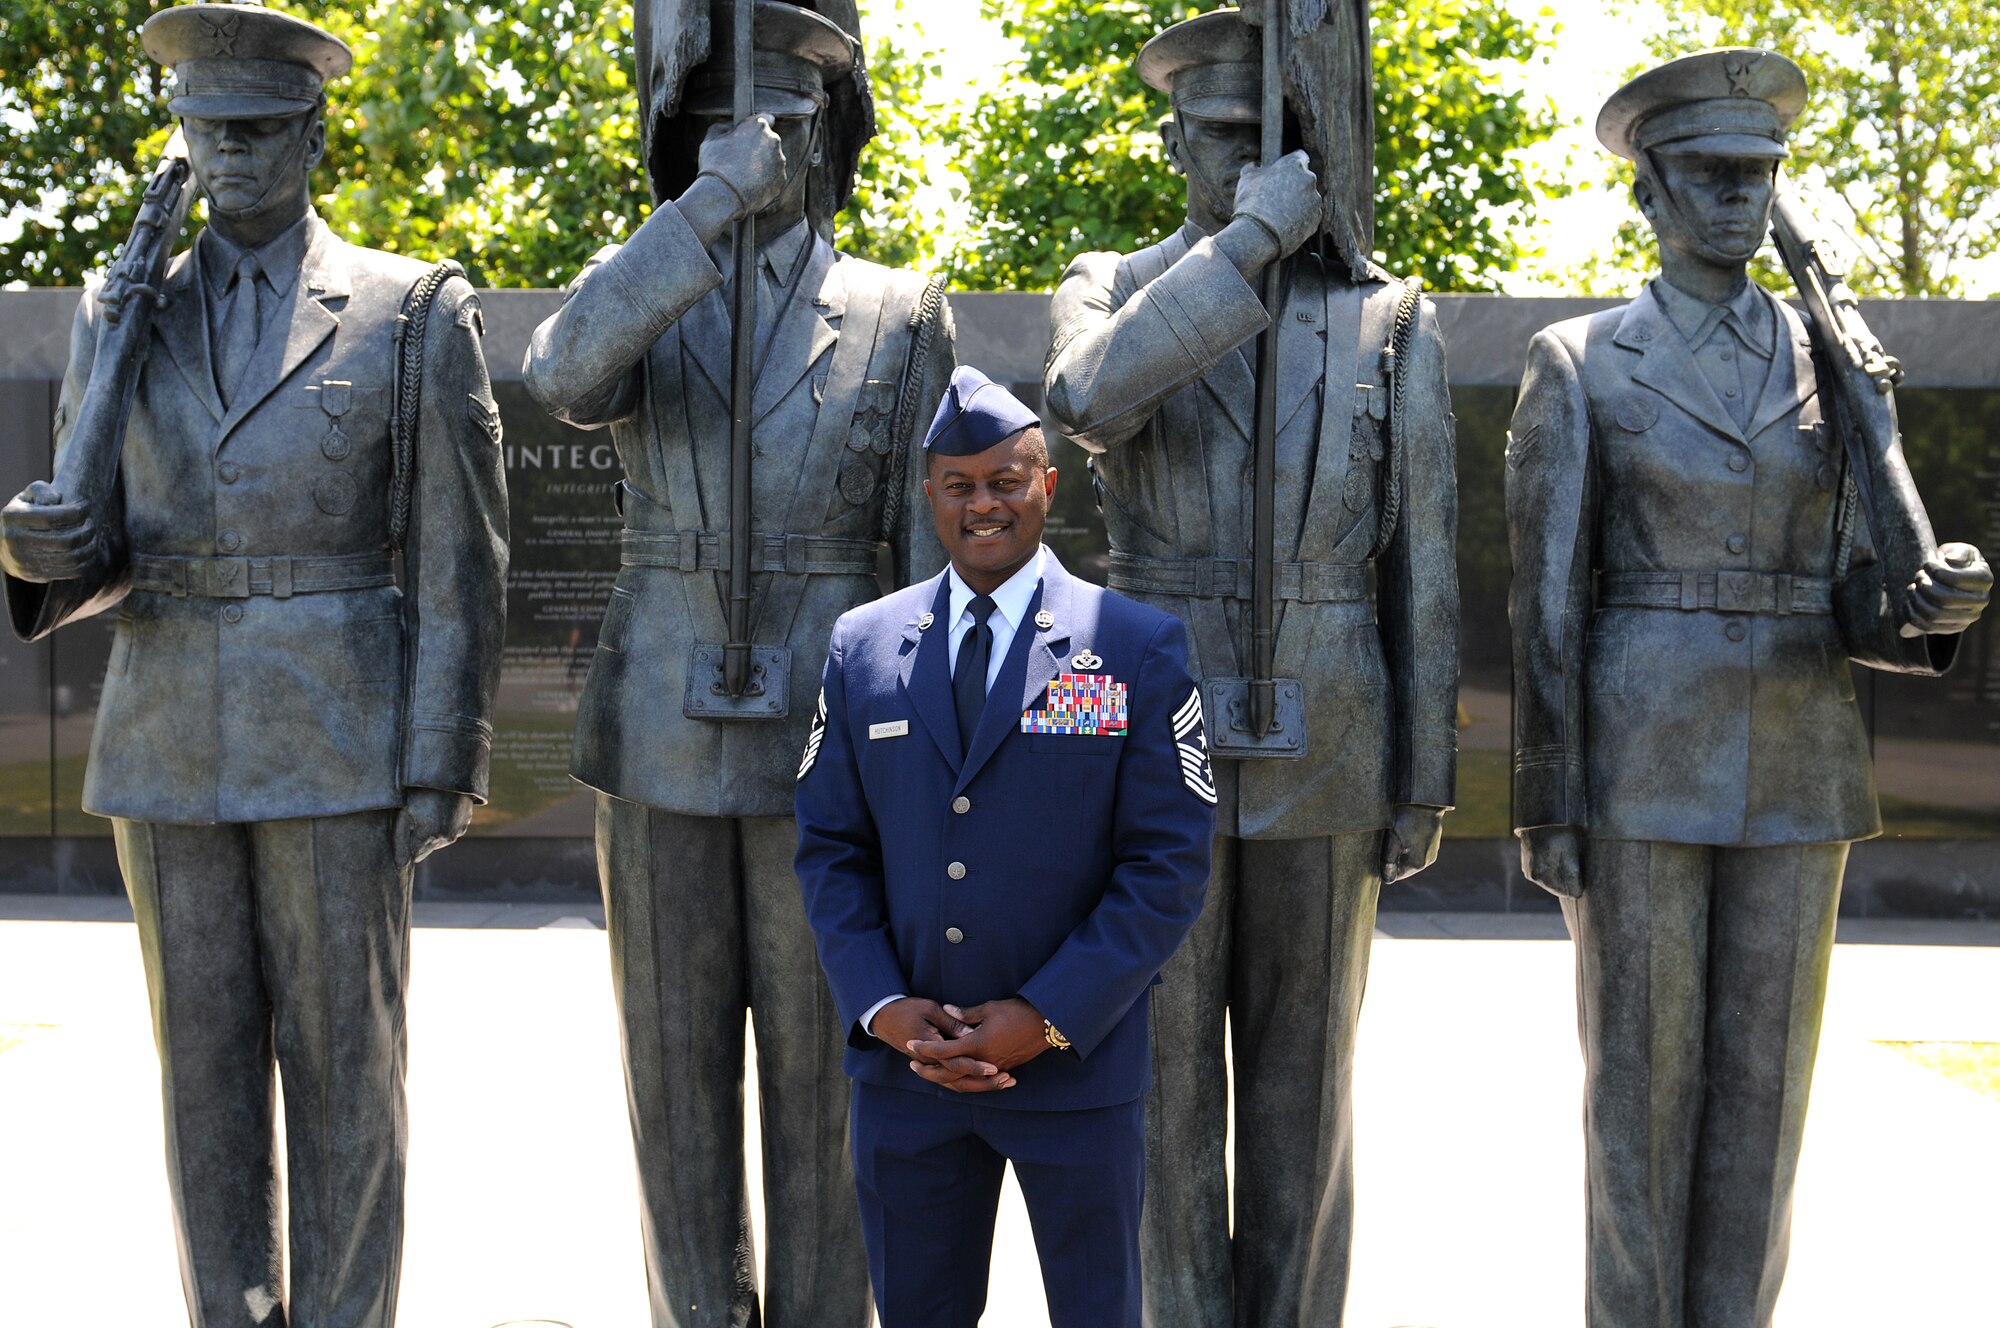 Chief Master Sgt. Harry Hutchinson, 81st Training Wing command chief, stands in front of the Air Force Honor Guard Memorial during a Capitol Hill visit, May 14, 2015, at the Air Force Memorial, Arlington, Va. During the visit, Keesler leadership met with Mississippi congressional representatives to discuss Keesler’s growth and development, and its economic impact on the state. (U.S. Air Force photo by Airman 1st Class Duncan McElroy)